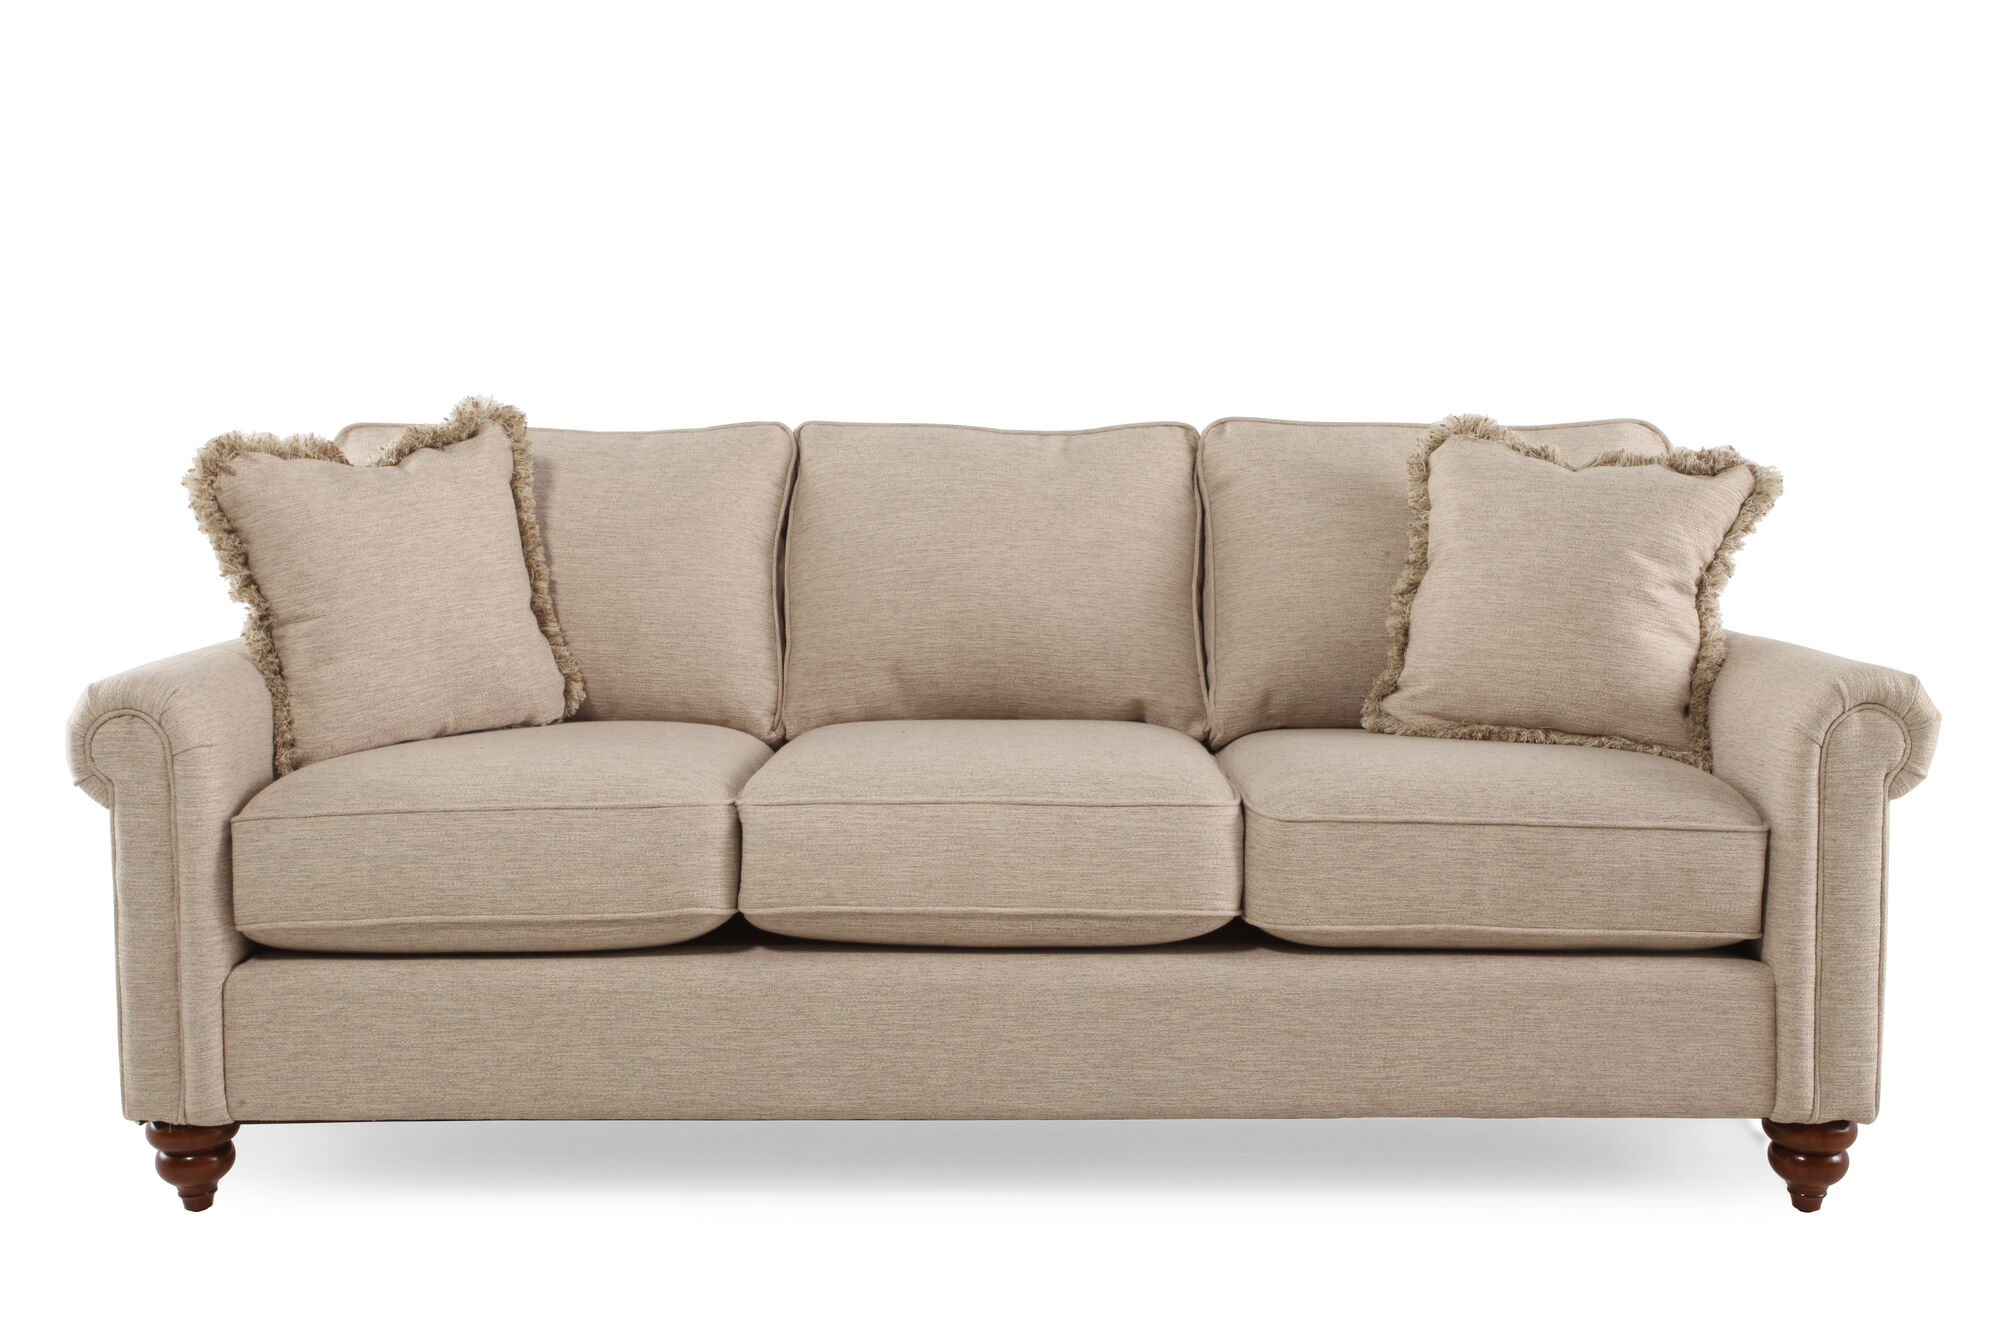 Casual 85.5" Rolled Arm Sofa in Beige Mathis Brothers